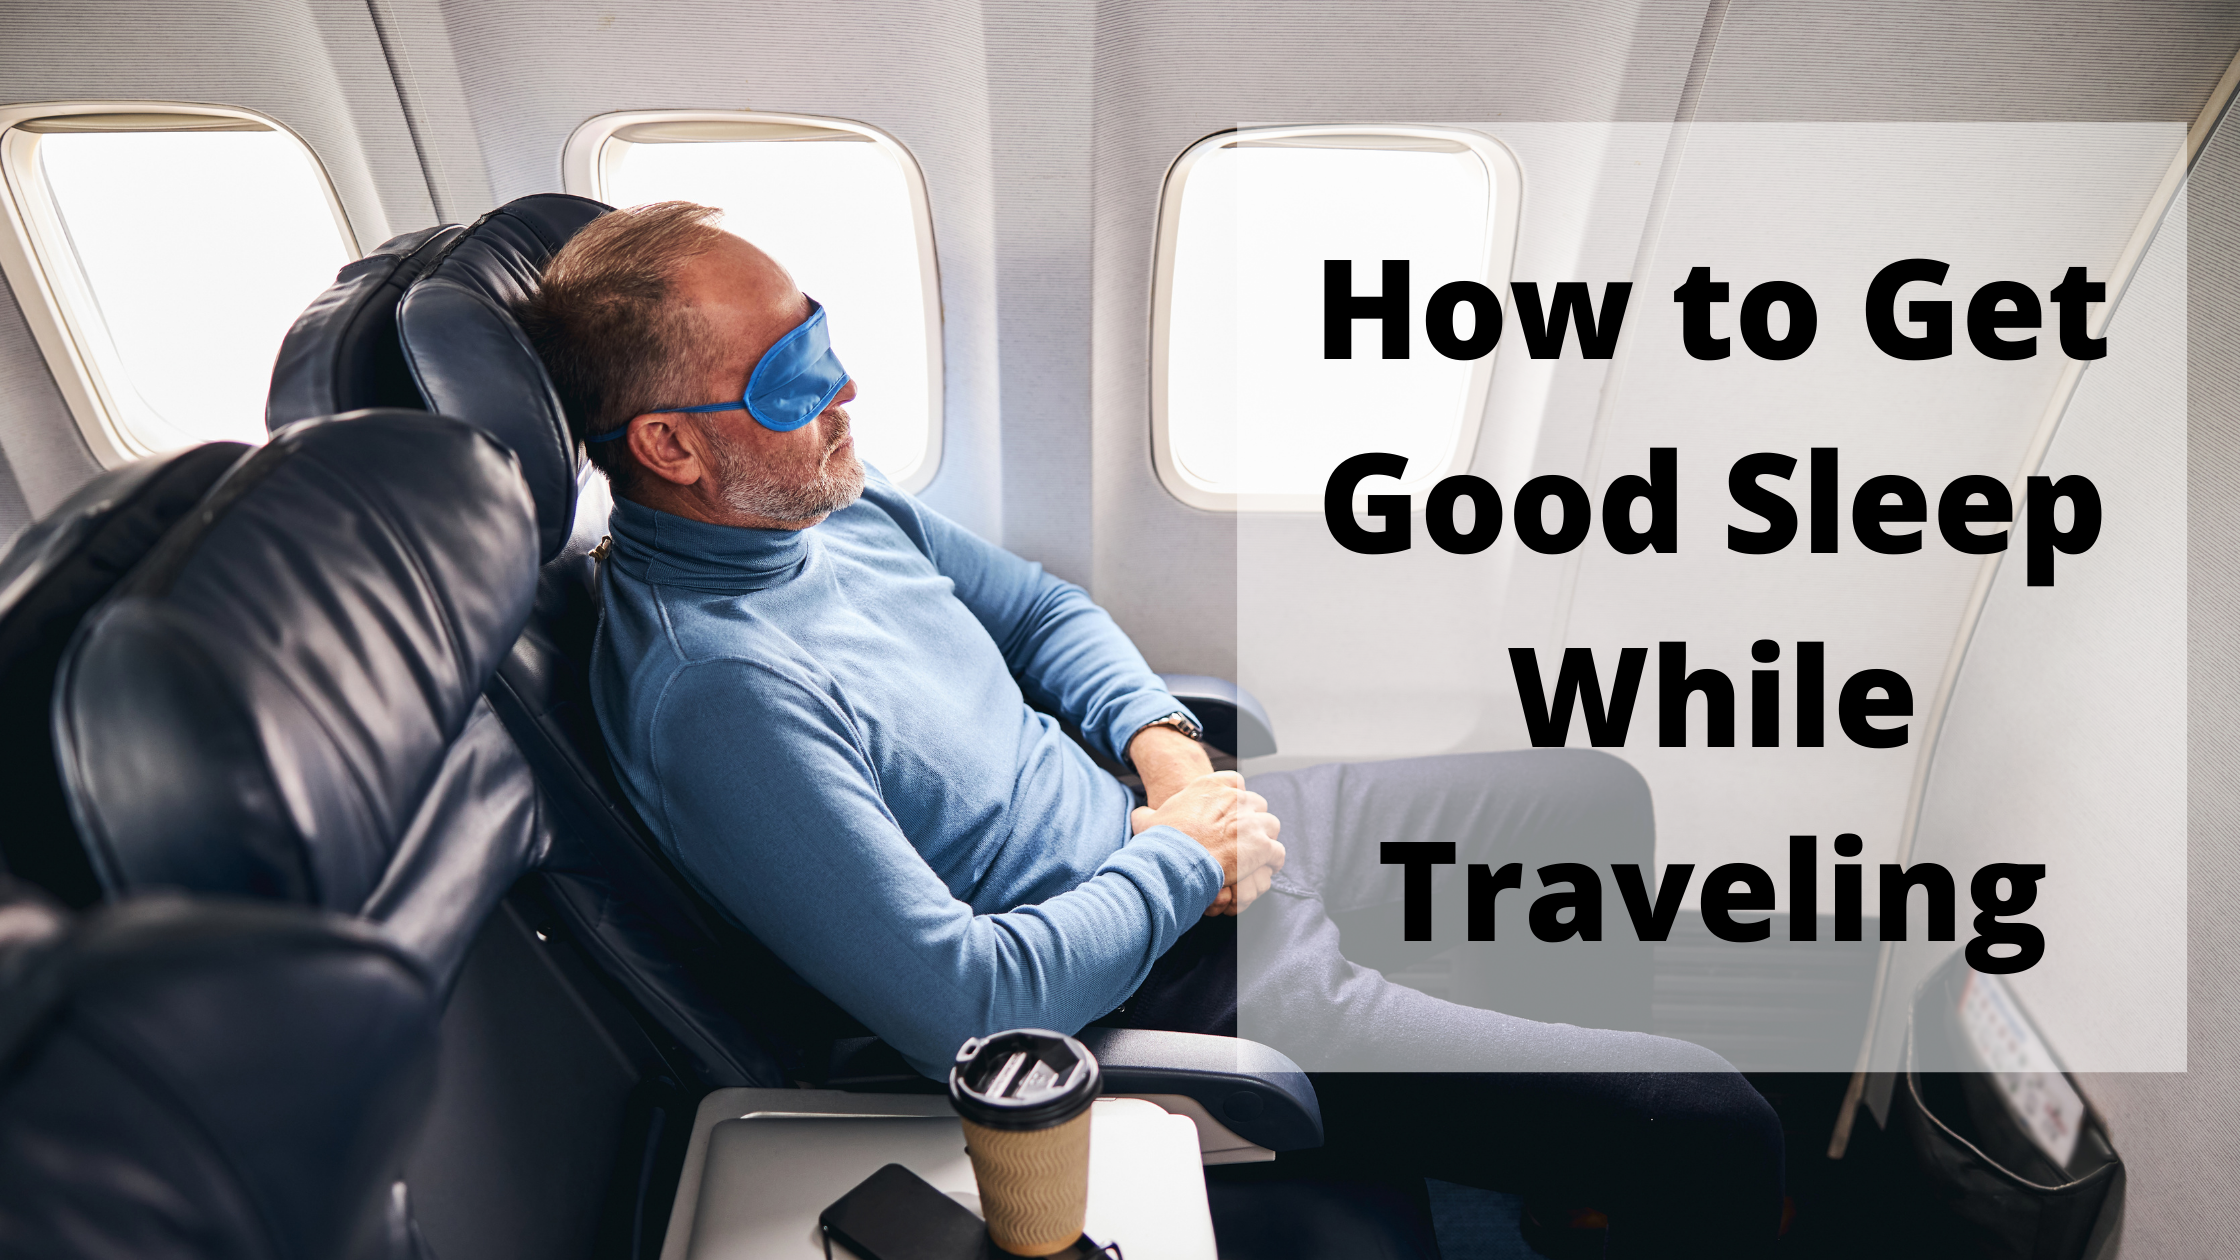 How to Get Good Sleep While Traveling